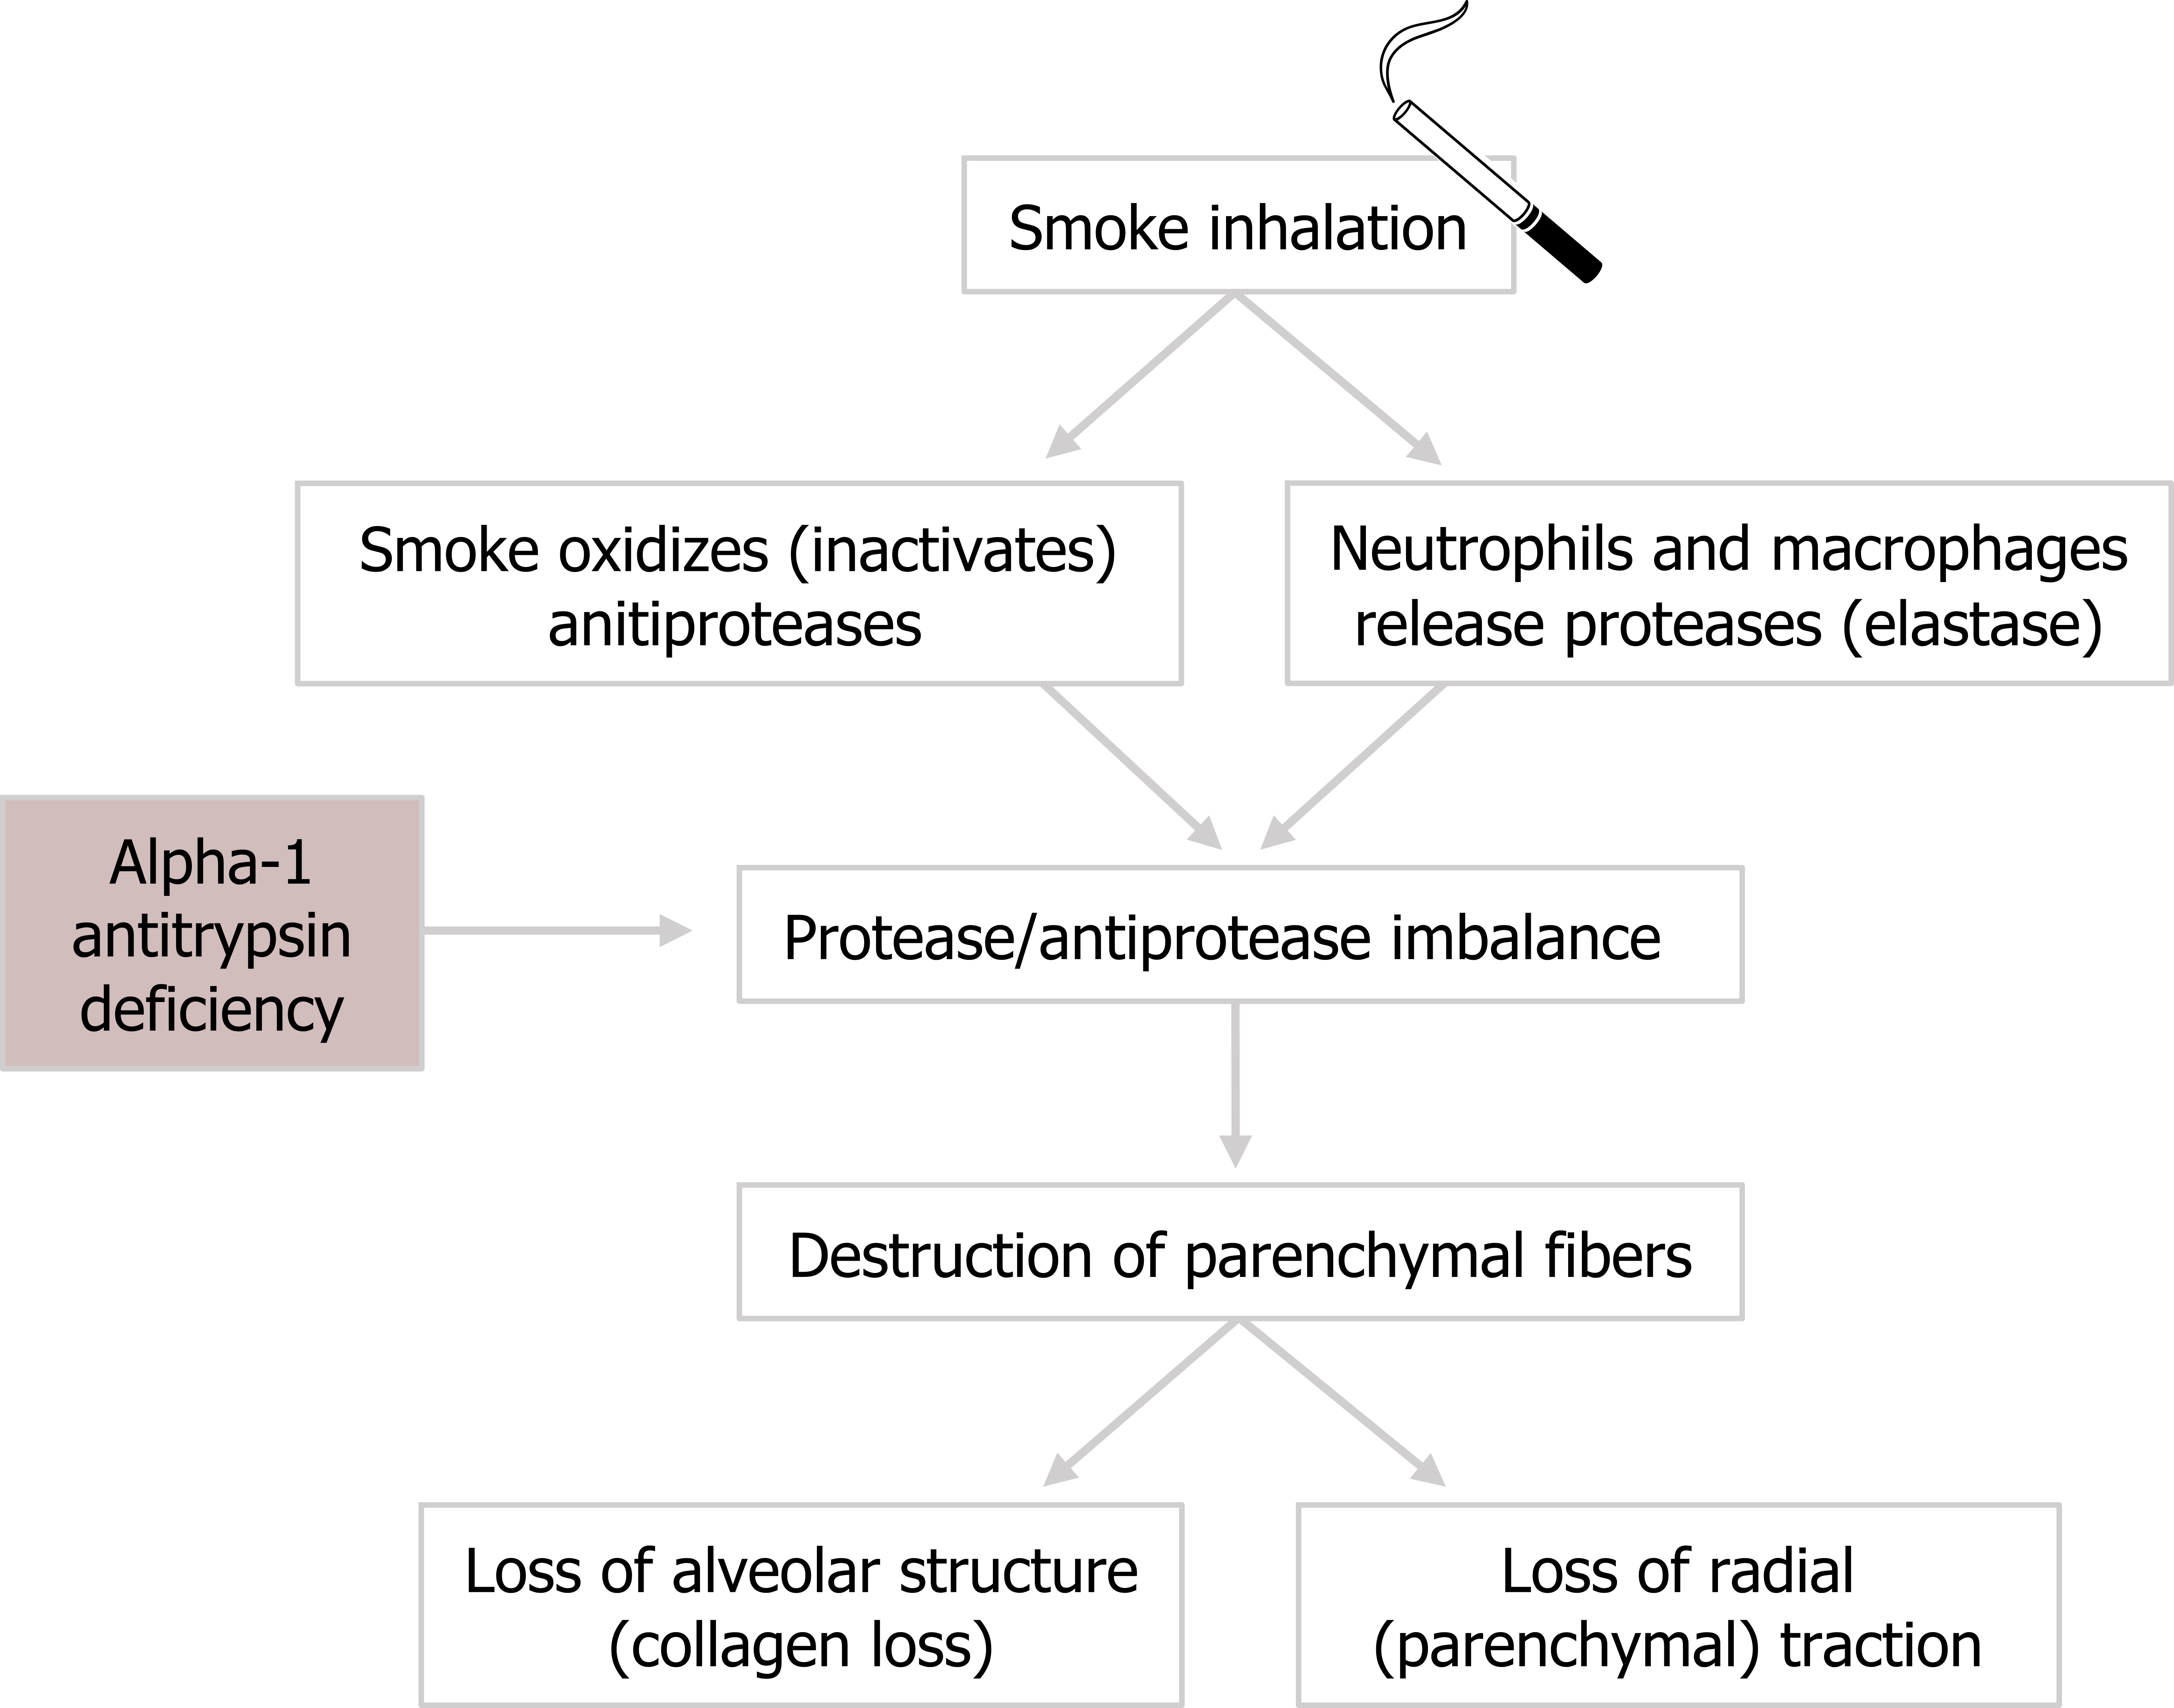 Smoke inhalation arrows to smoke oxidizes (inactivates) anti-proteases and neutrophils and macrophages release proteases (elastase) arrows combining to protease:antiprotease imbalance arrow to destruction of parenchymal fibers arrows to loss of alveolar structure (collagen loss) and loss of radial (parenchymal) traction. Alpha-1 antitrypsin deficiency arrow to protease:antiprotease imbalance